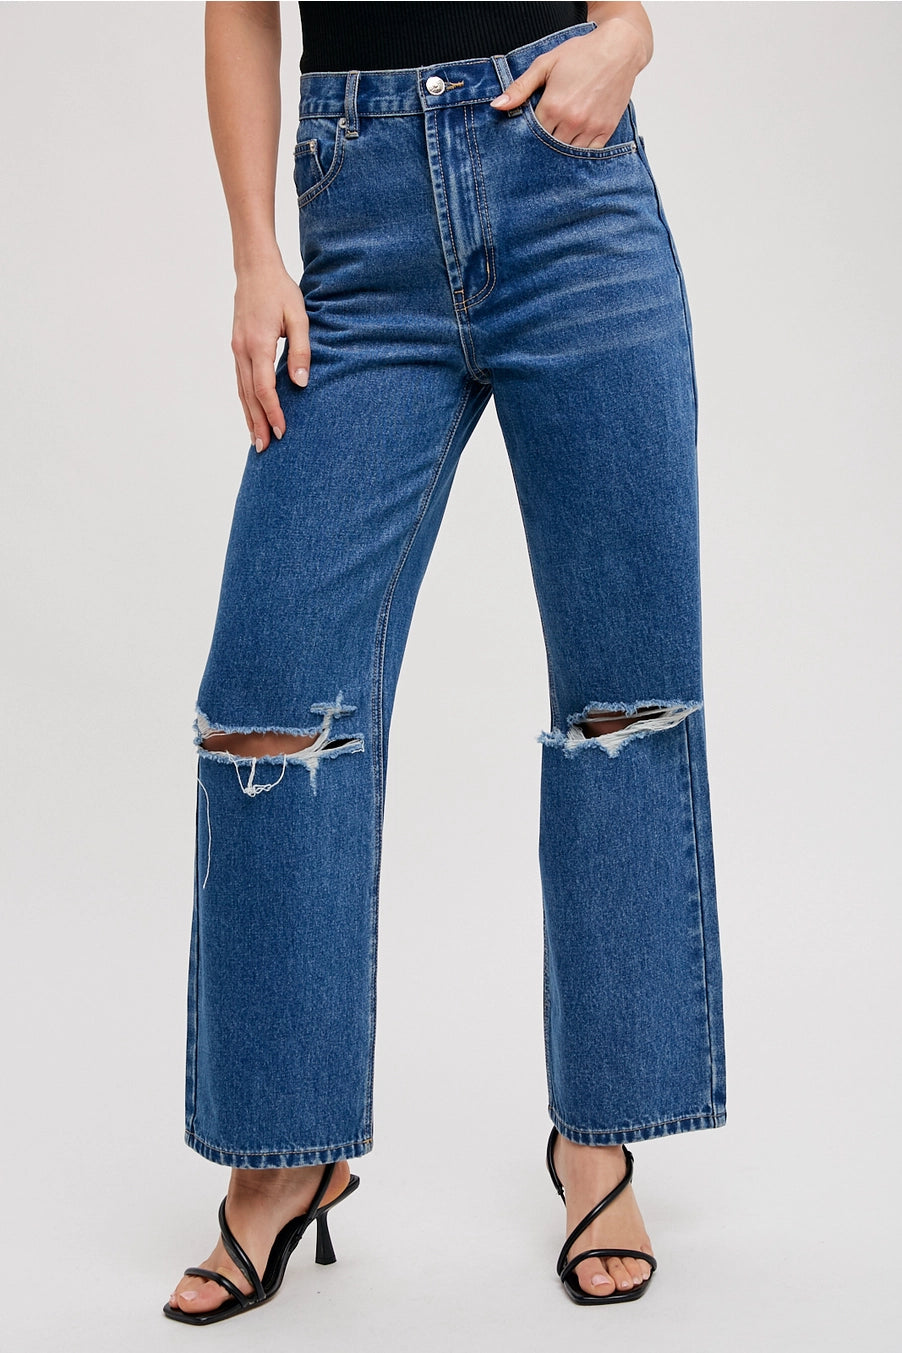 High Rised Denim Washed Distressed Jeans